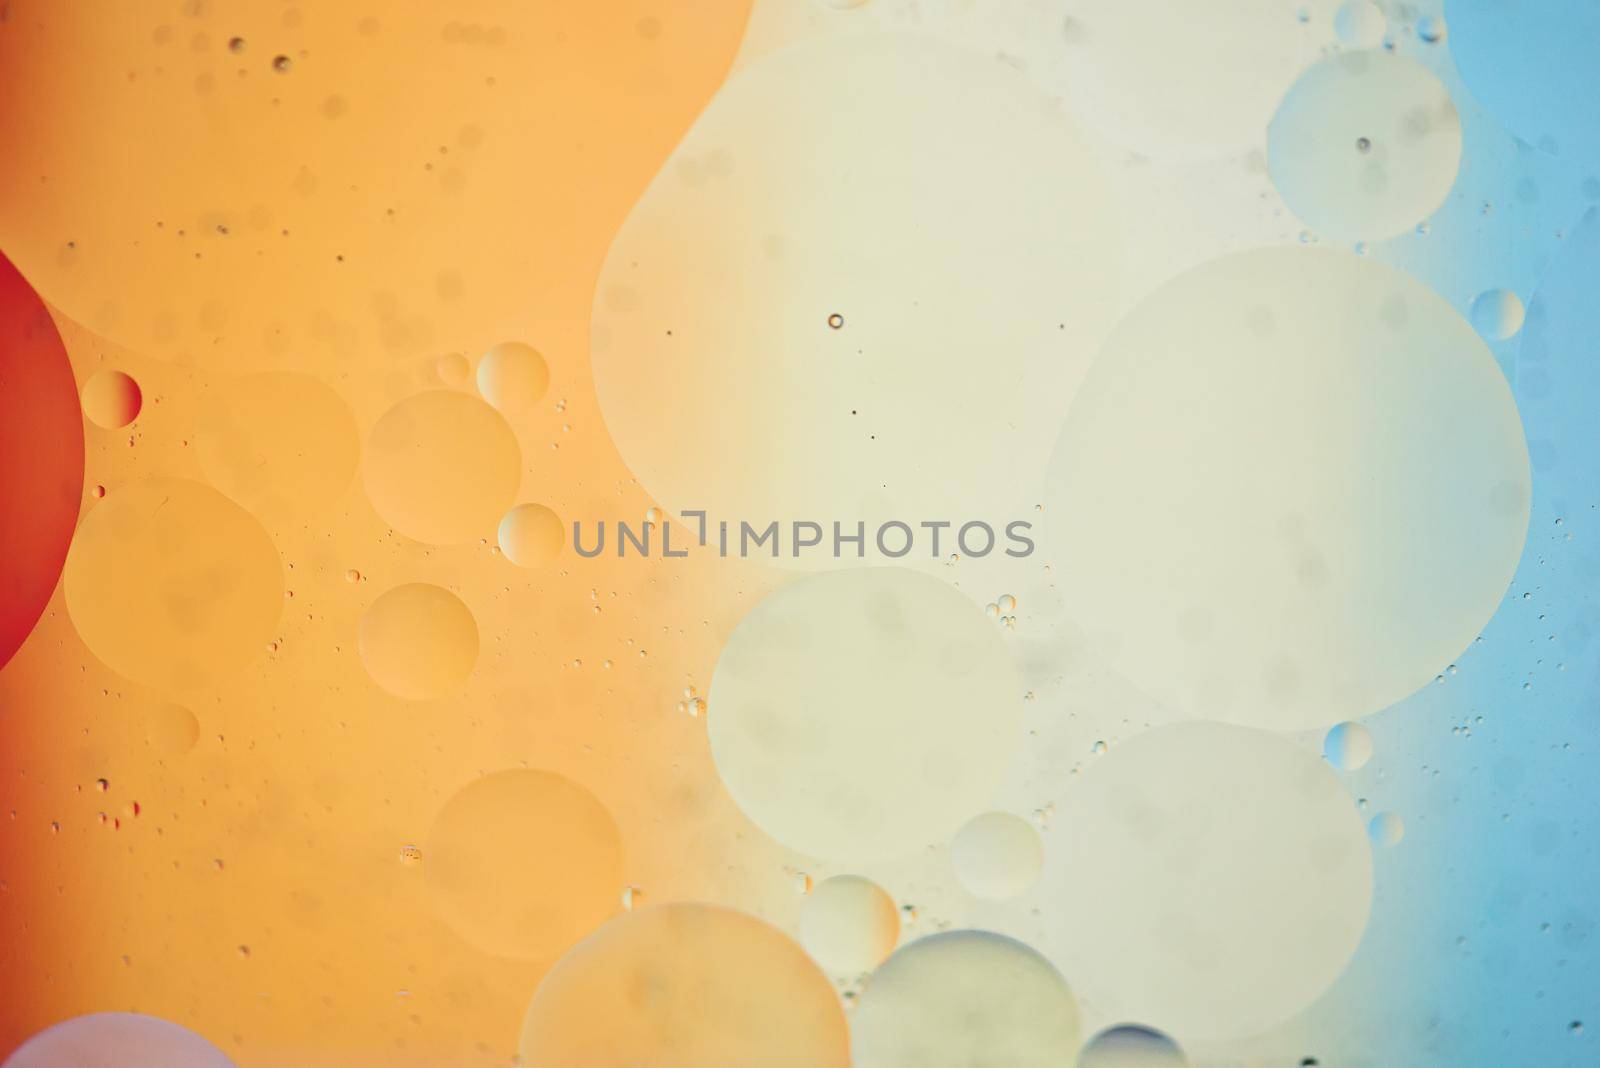 Oil drops in water. Abstract psychedelic pattern image rainbow colored. Abstract background with colorful gradient colors. DOF